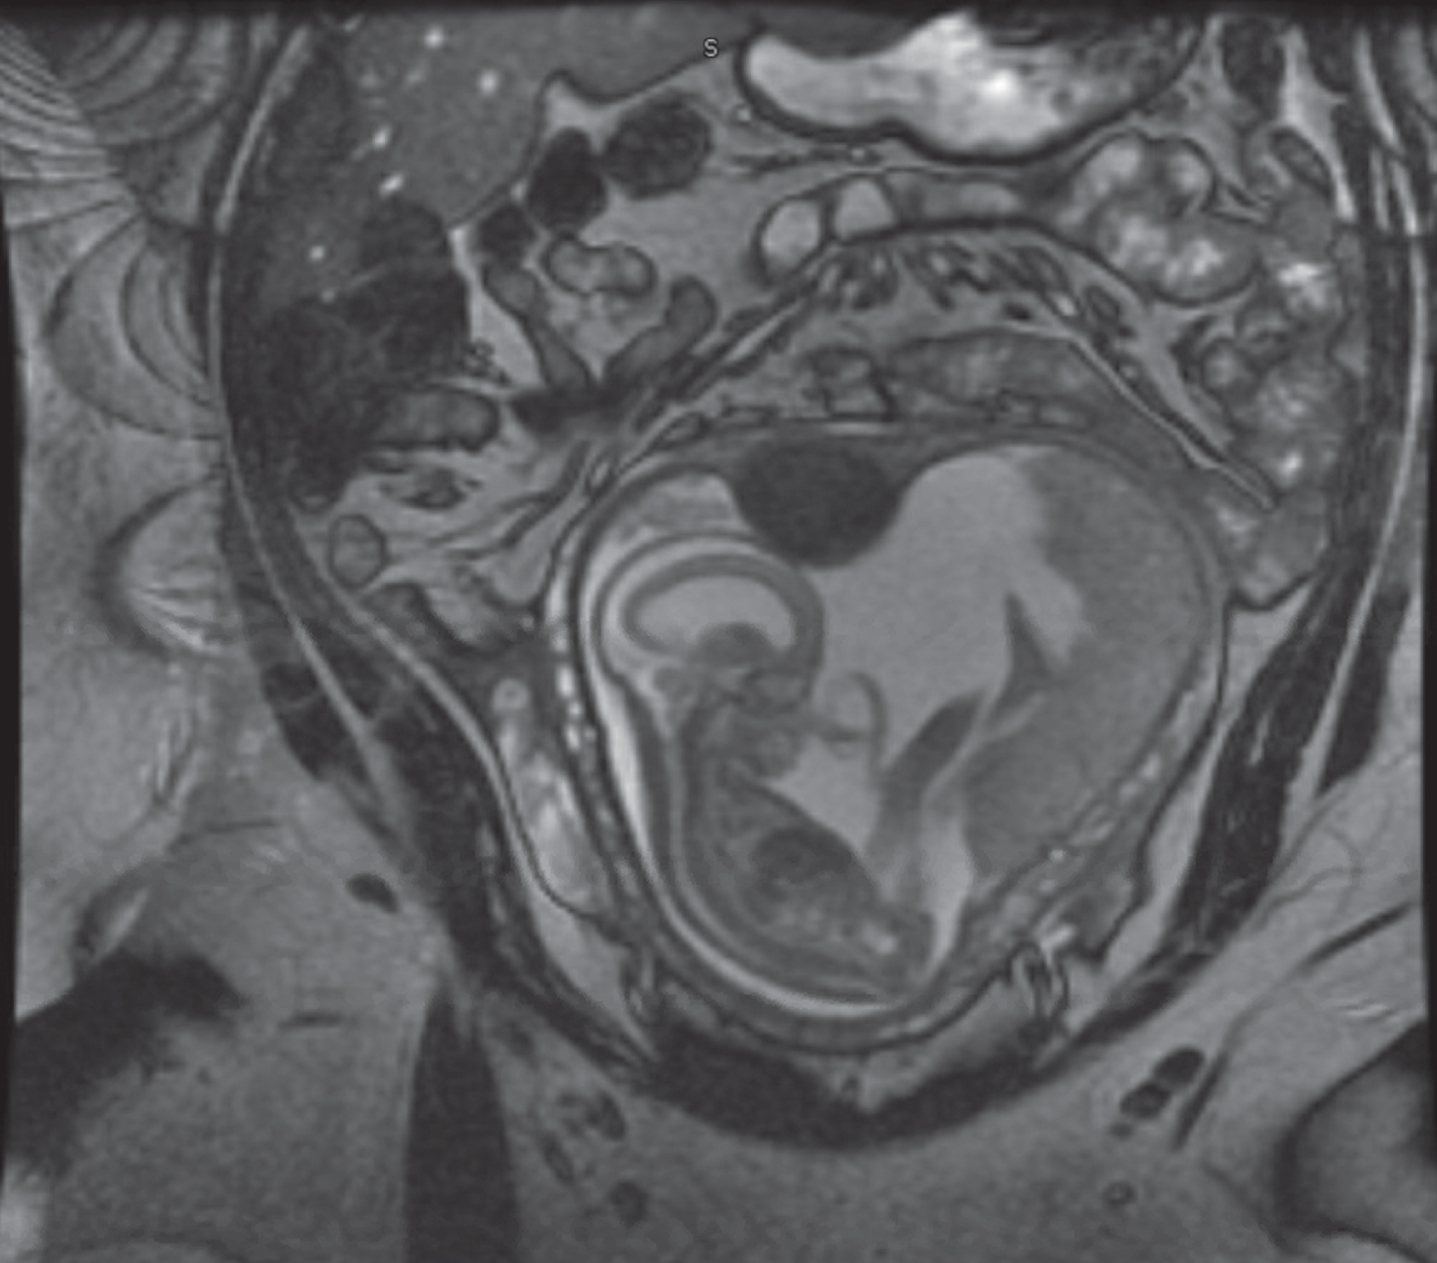 19 weeks old fetal brain MRI showing CAS associated severe ventriculomegaly and cerebellar atrophy